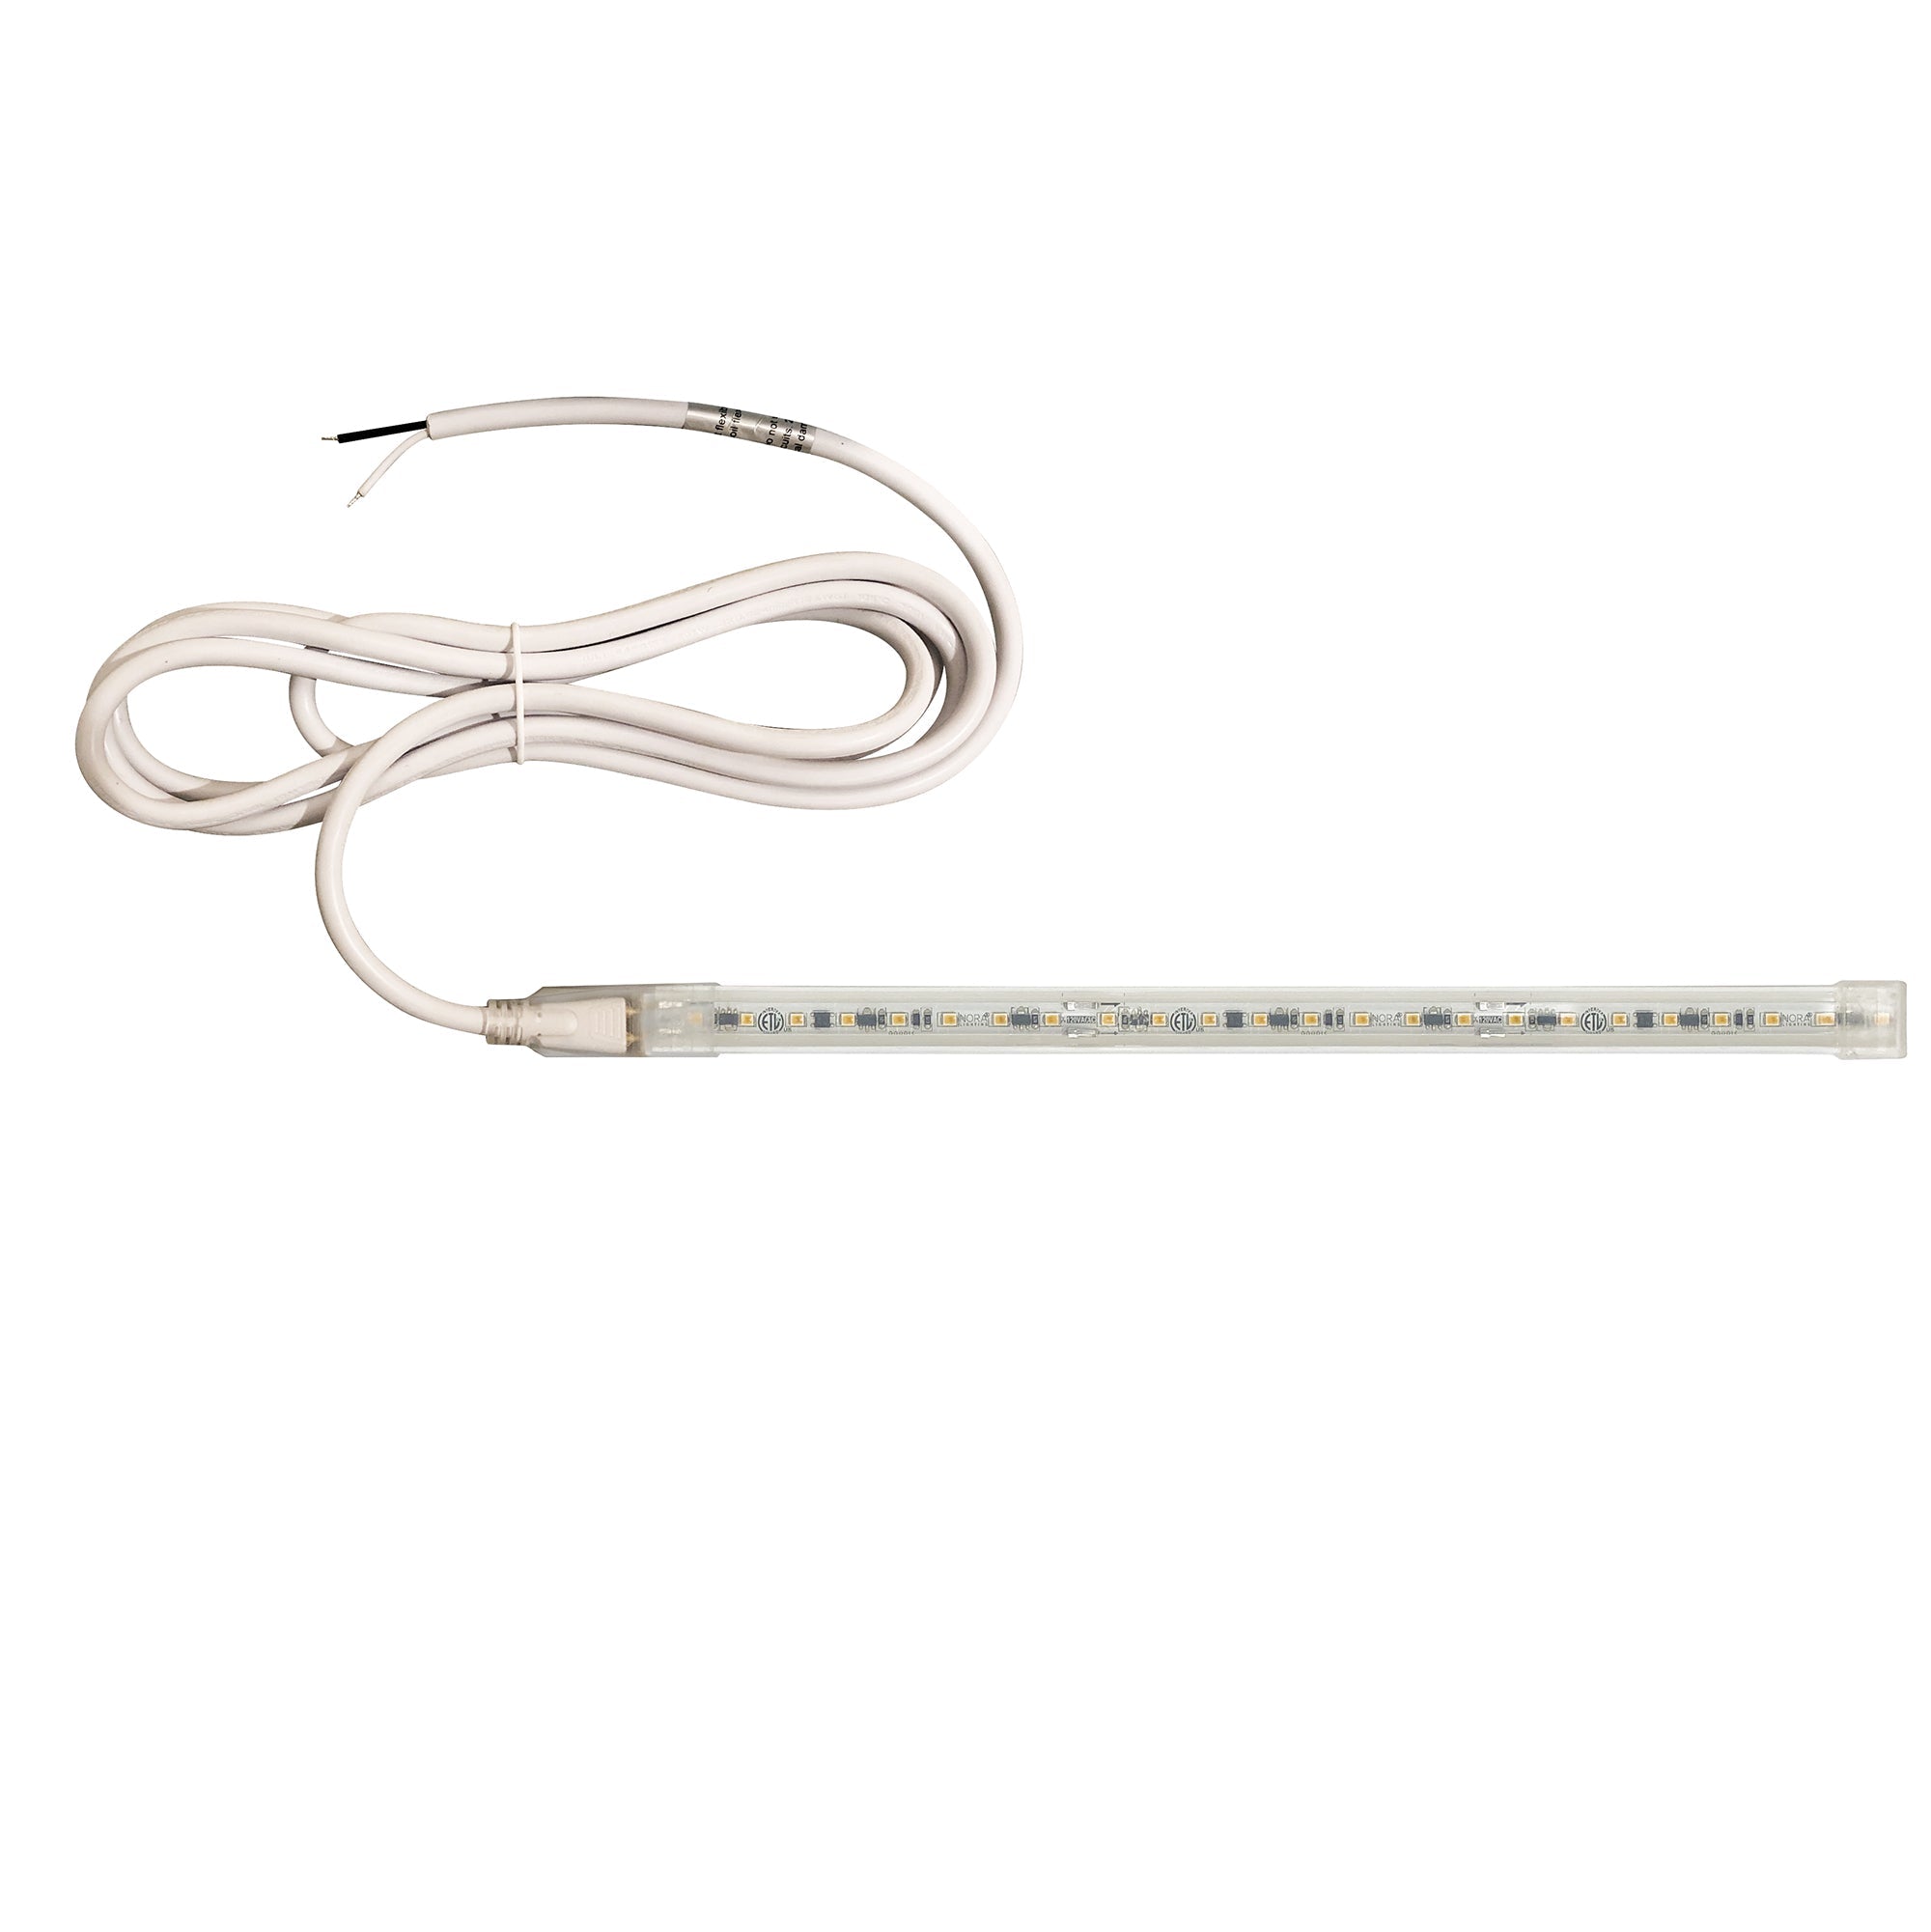 Nora Lighting NUTP13-W94-8-12-930/HW - Accent / Undercabinet - Custom Cut 94-ft, 8-in 120V Continuous LED Tape Light, 330lm / 3.6W per foot, 3000K, w/ Mounting Clips and 8' Hardwired Power Cord